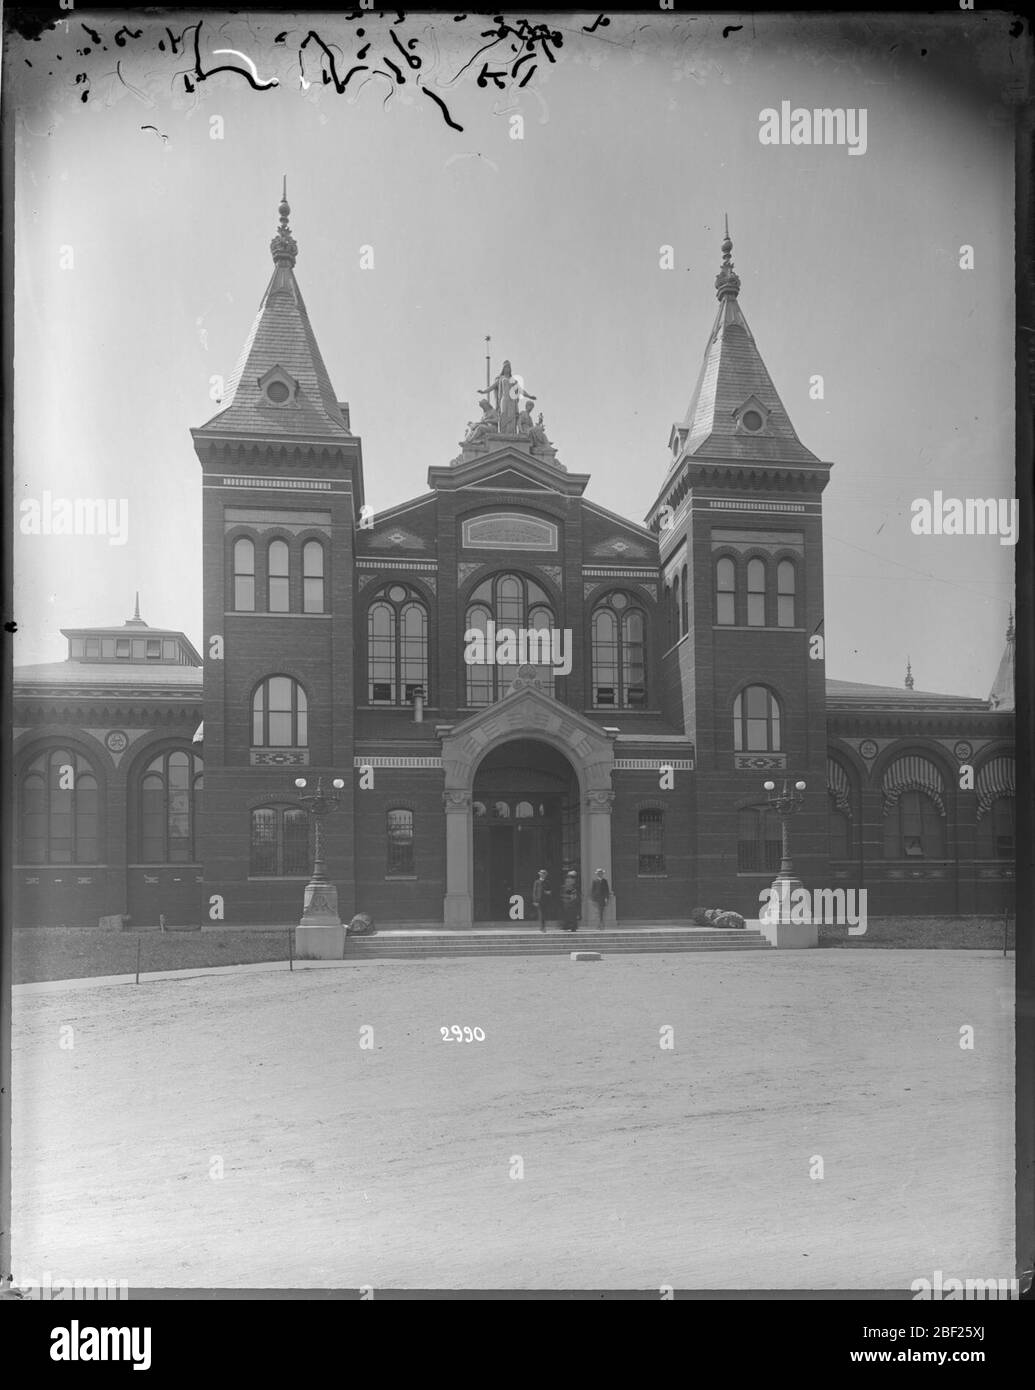 Exterior View of the United States National Museum. Exterior view of the United States National Museum, now known as the Arts and Industries Building.Smithsonian Institution Archives, Acc. 11-006, Box 006, Image No. Stock Photo